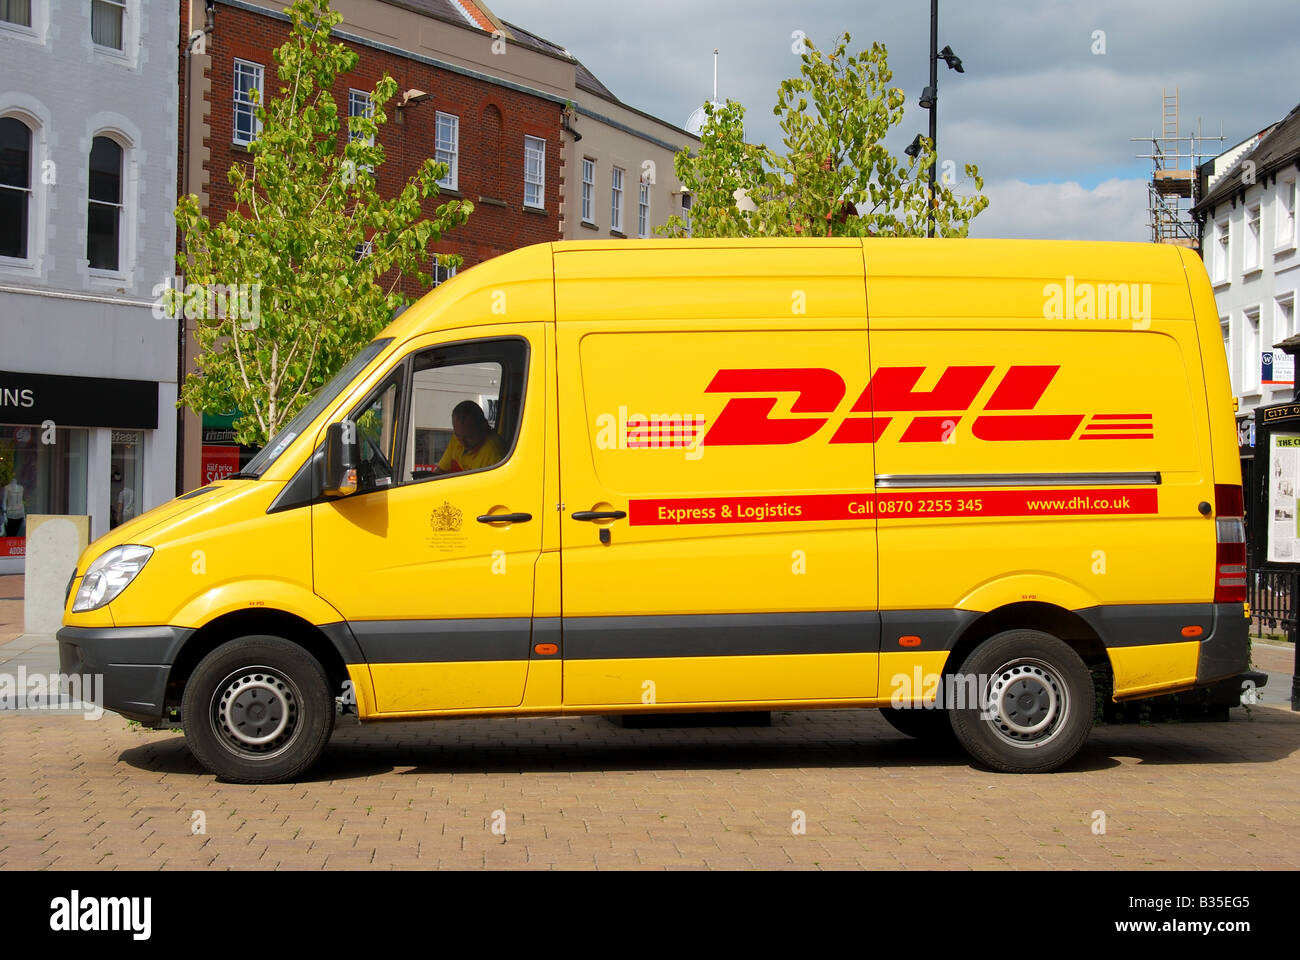 DHL Van, Market Square, High Town, Hereford, Herefordshire, England, United Kingdom Stock Photo